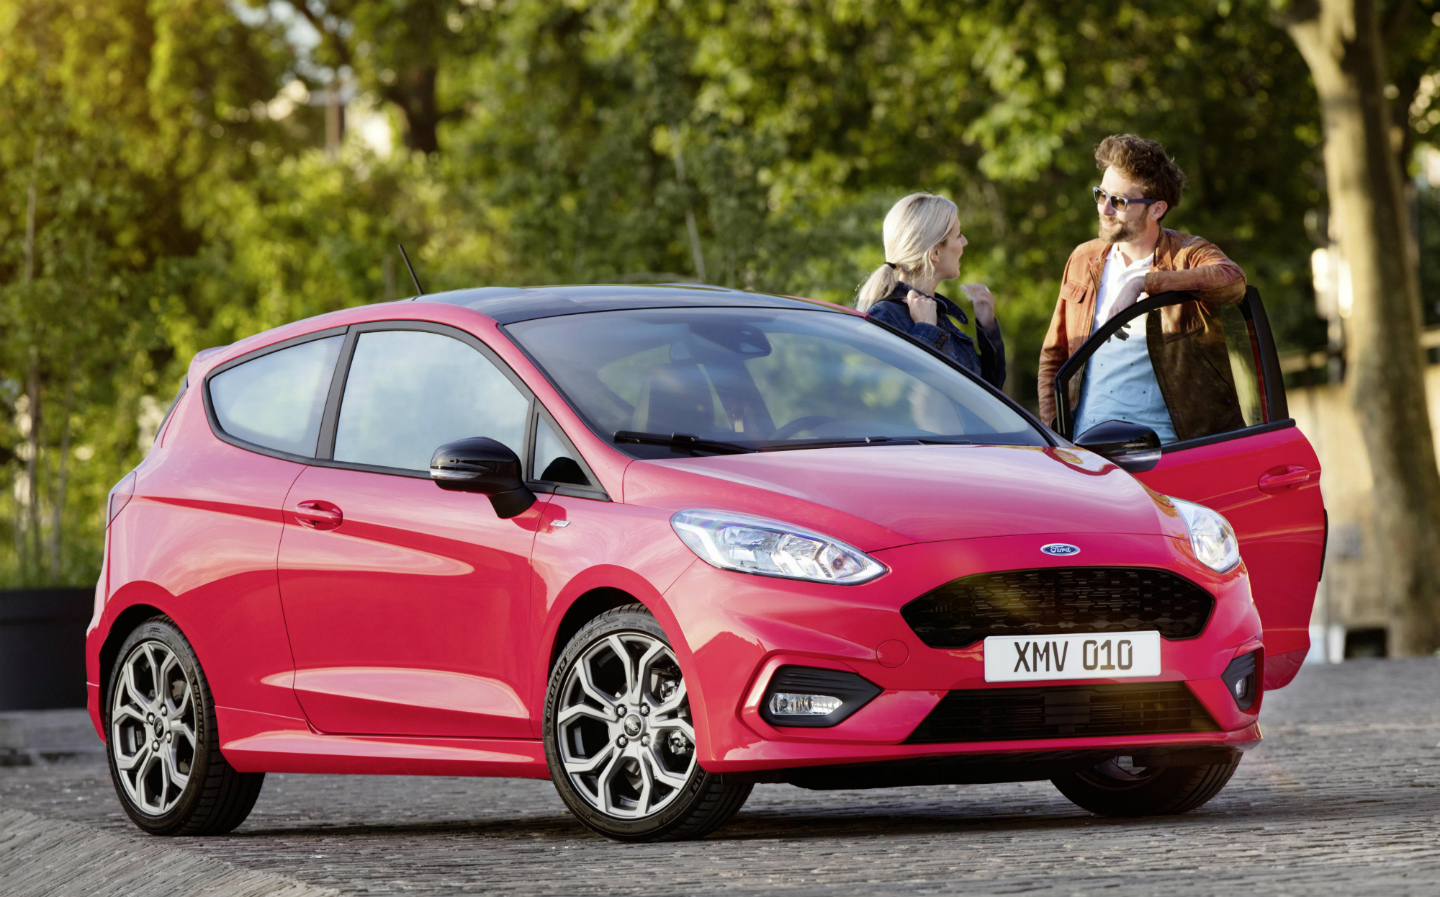 The best small car with 0% APR: Ford Fiesta